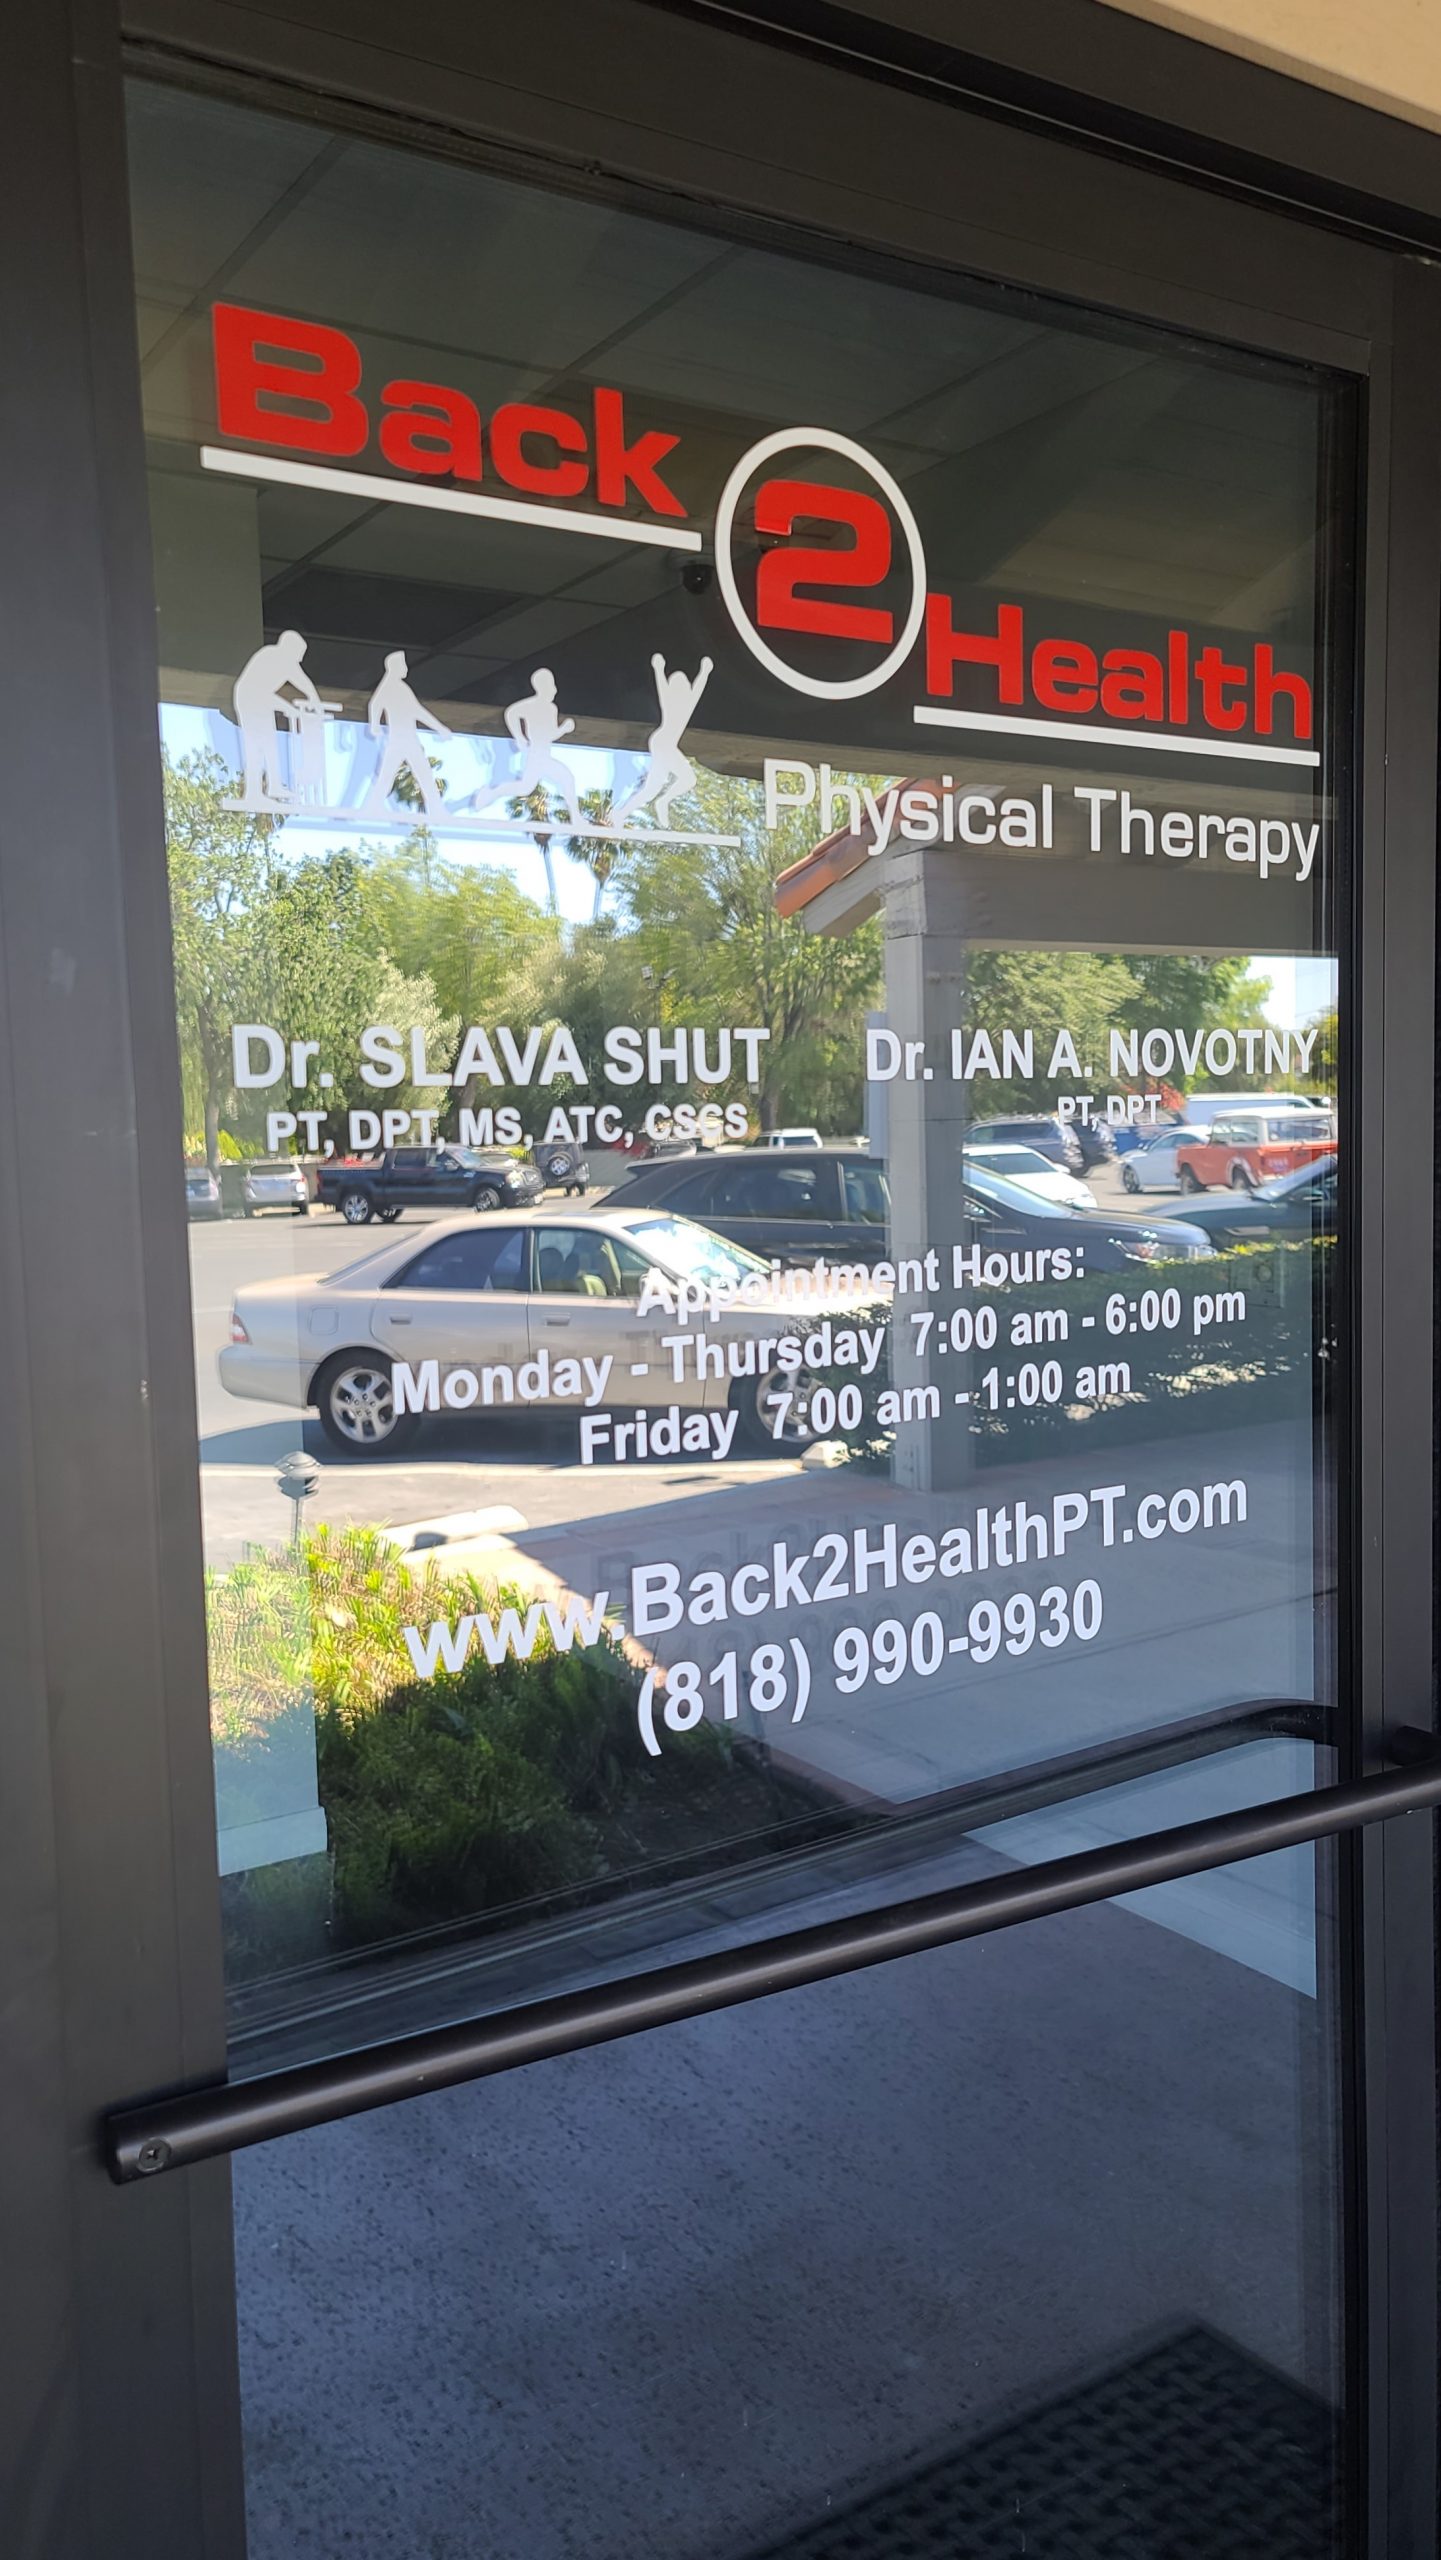 Doorway window graphics for Back 2 Health's sign package for their Encino physical therapy center.